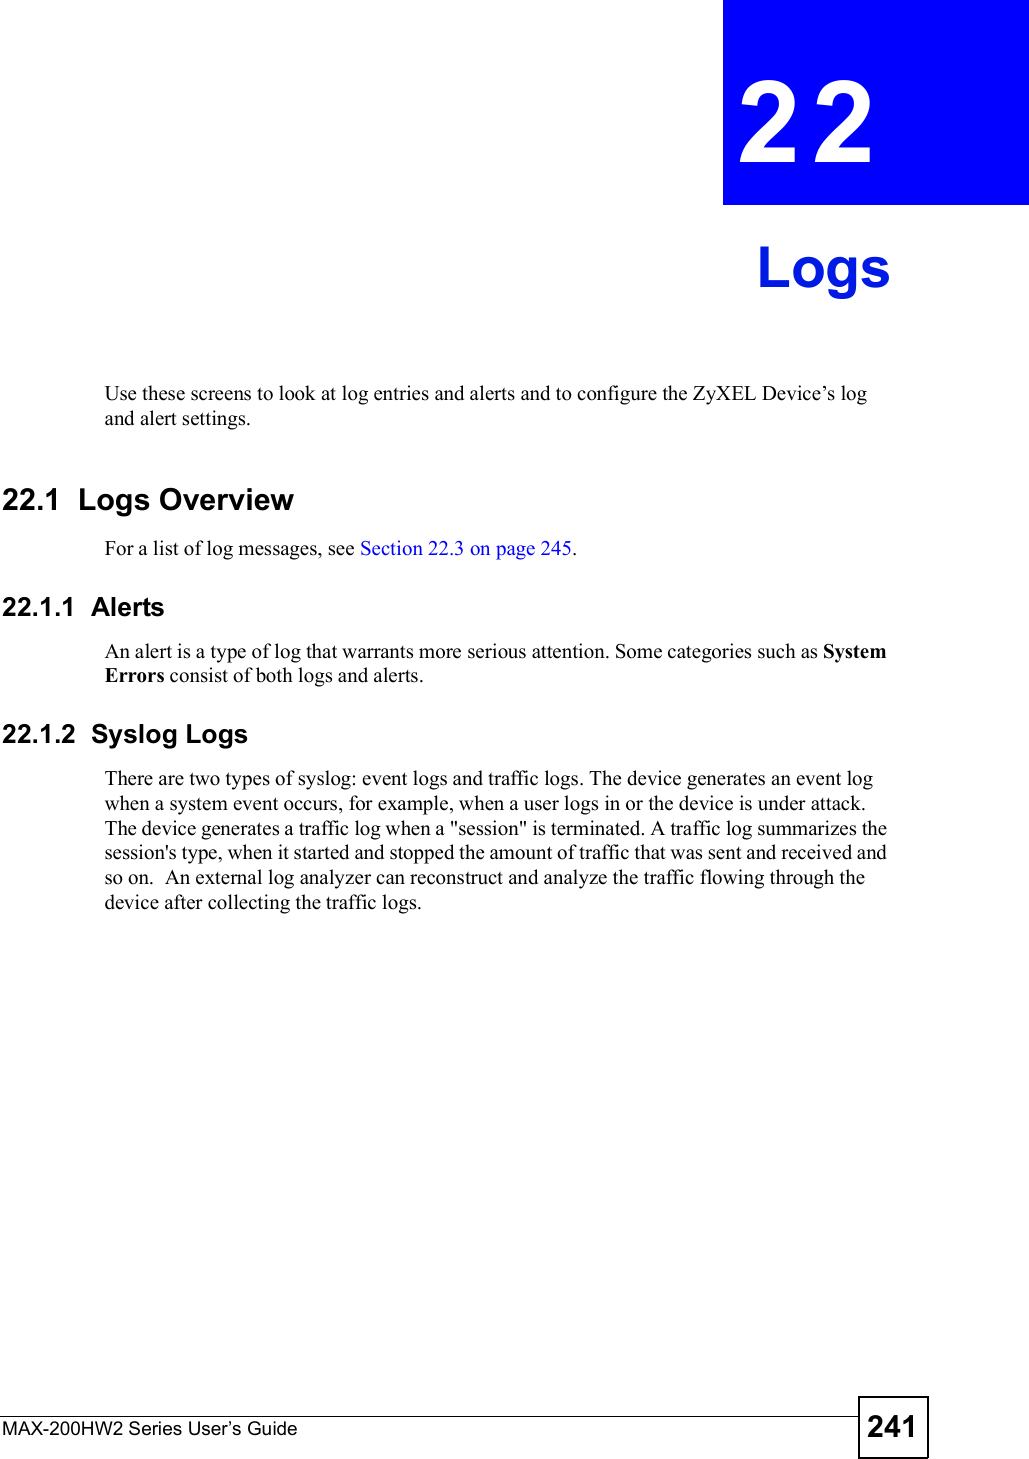 MAX-200HW2 Series User s Guide 241CHAPTER 22LogsUse these screens to look at log entries and alerts and to configure the ZyXEL Device!s log and alert settings.22.1  Logs OverviewFor a list of log messages, see Section 22.3 on page 245.22.1.1  AlertsAn alert is a type of log that warrants more serious attention. Some categories such as SystemErrors consist of both logs and alerts.22.1.2  Syslog LogsThere are two types of syslog: event logs and traffic logs. The device generates an event log when a system event occurs, for example, when a user logs in or the device is under attack. The device generates a traffic log when a &quot;session&quot; is terminated. A traffic log summarizes the session&apos;s type, when it started and stopped the amount of traffic that was sent and received and so on.  An external log analyzer can reconstruct and analyze the traffic flowing through the device after collecting the traffic logs. 